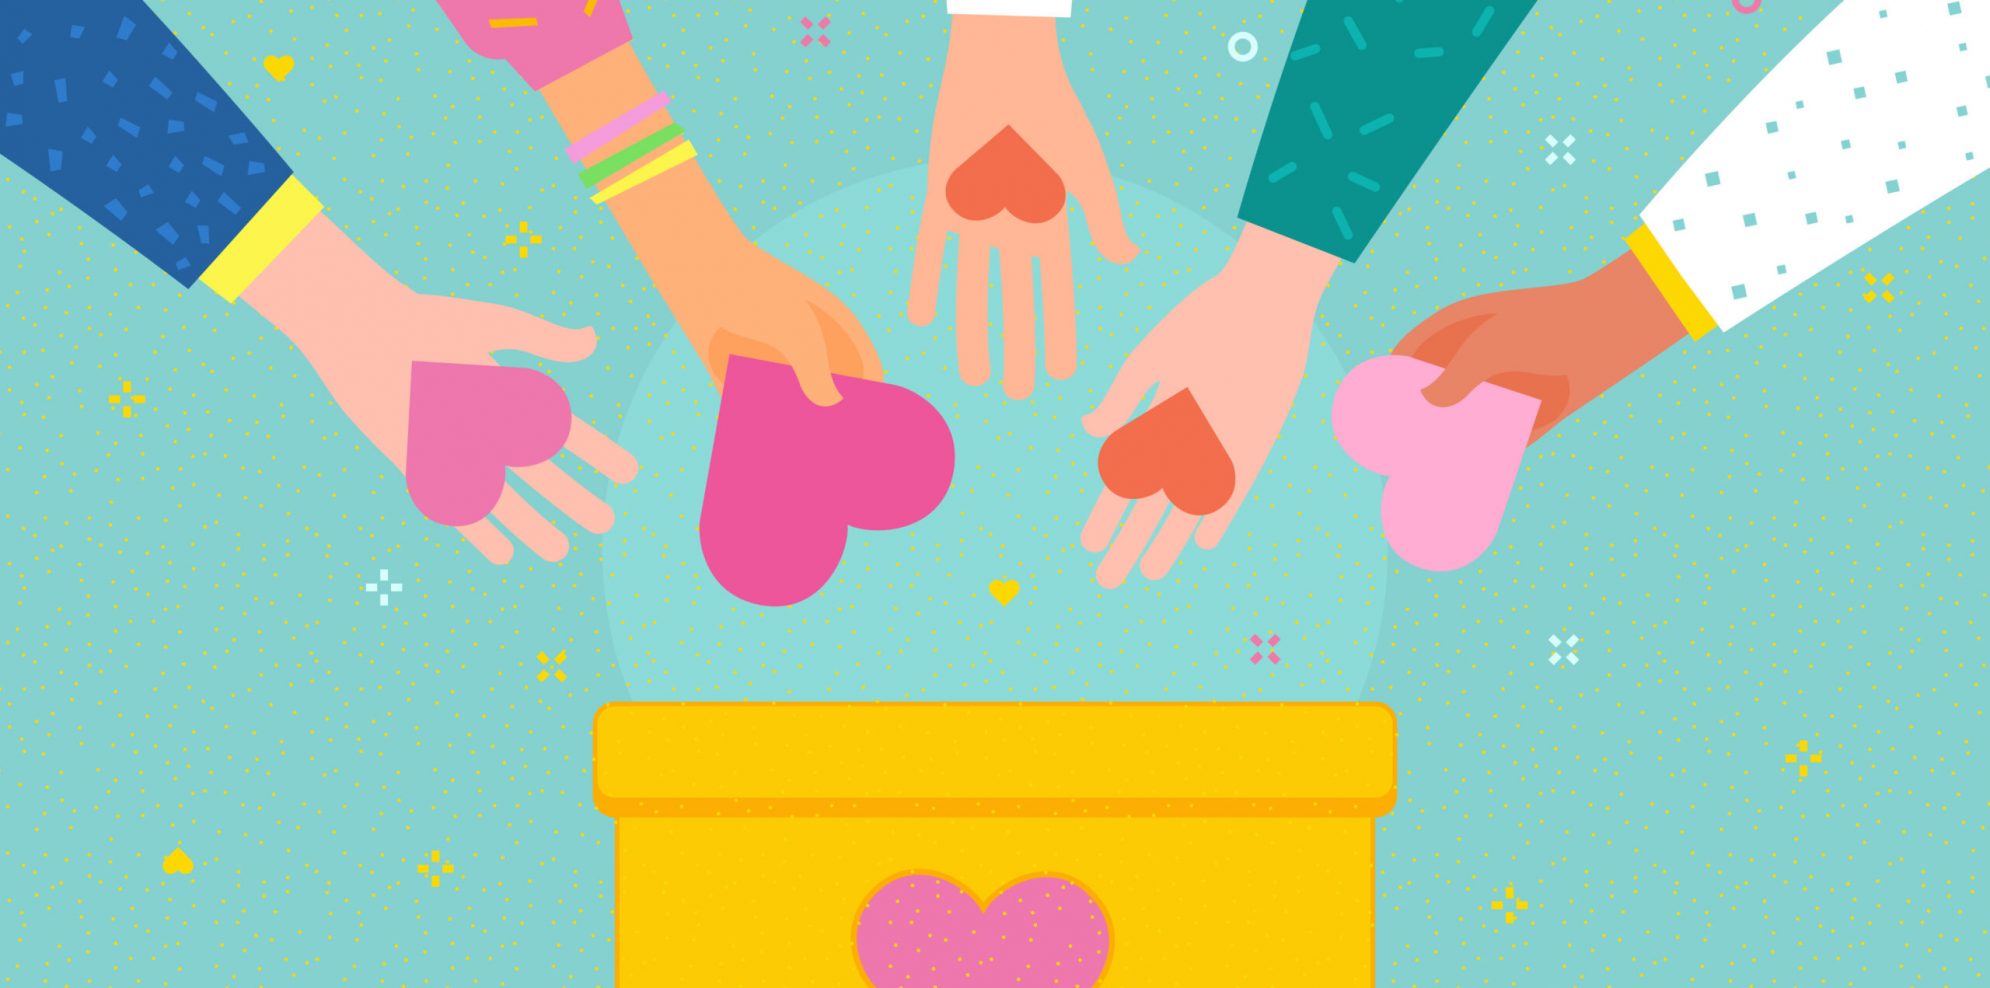 Concept of charity and donation. Give and share your love to people. Hands holding a heart symbol and put hearts in a donation box with heart. Flat design, vector illustration.